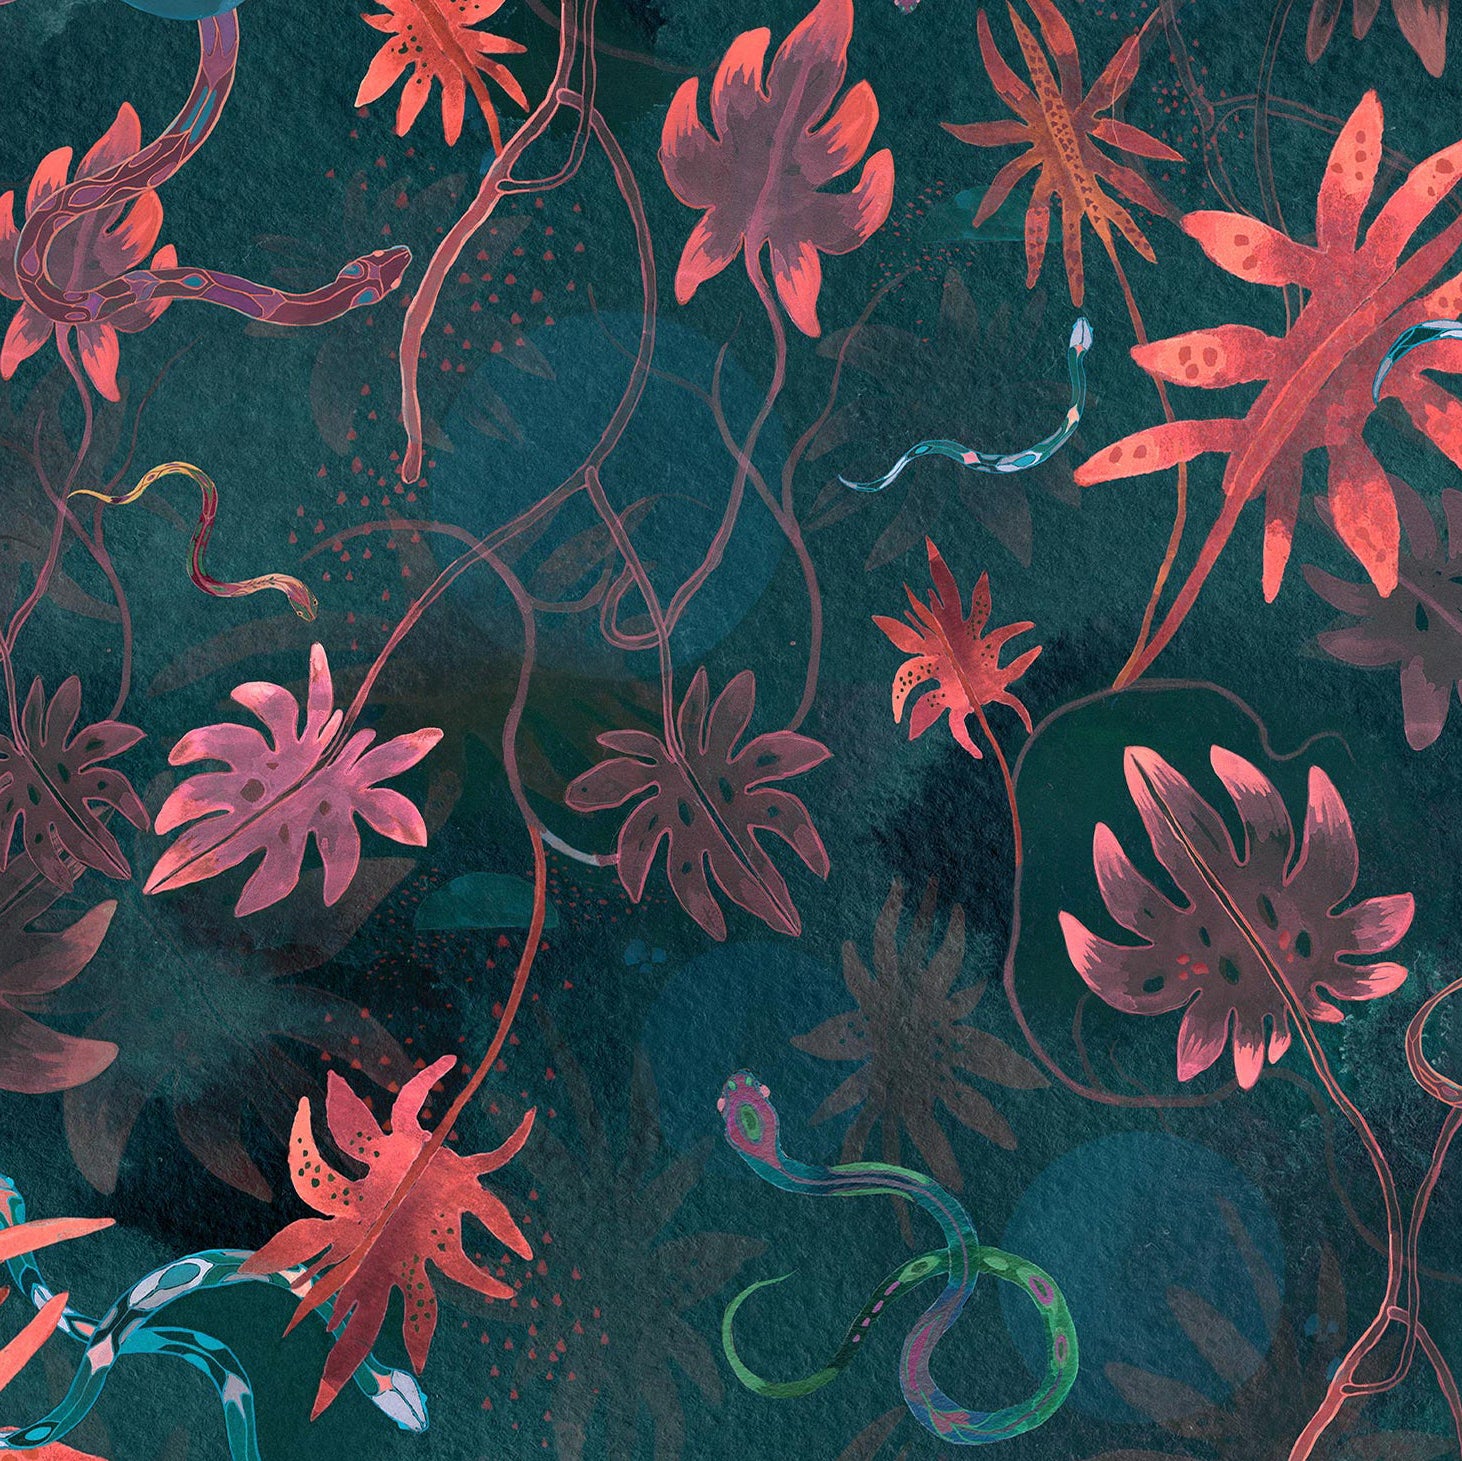 Detail of wallpaper in a playful leaf and snake print in pink, blue and green on a dark turquoise field.